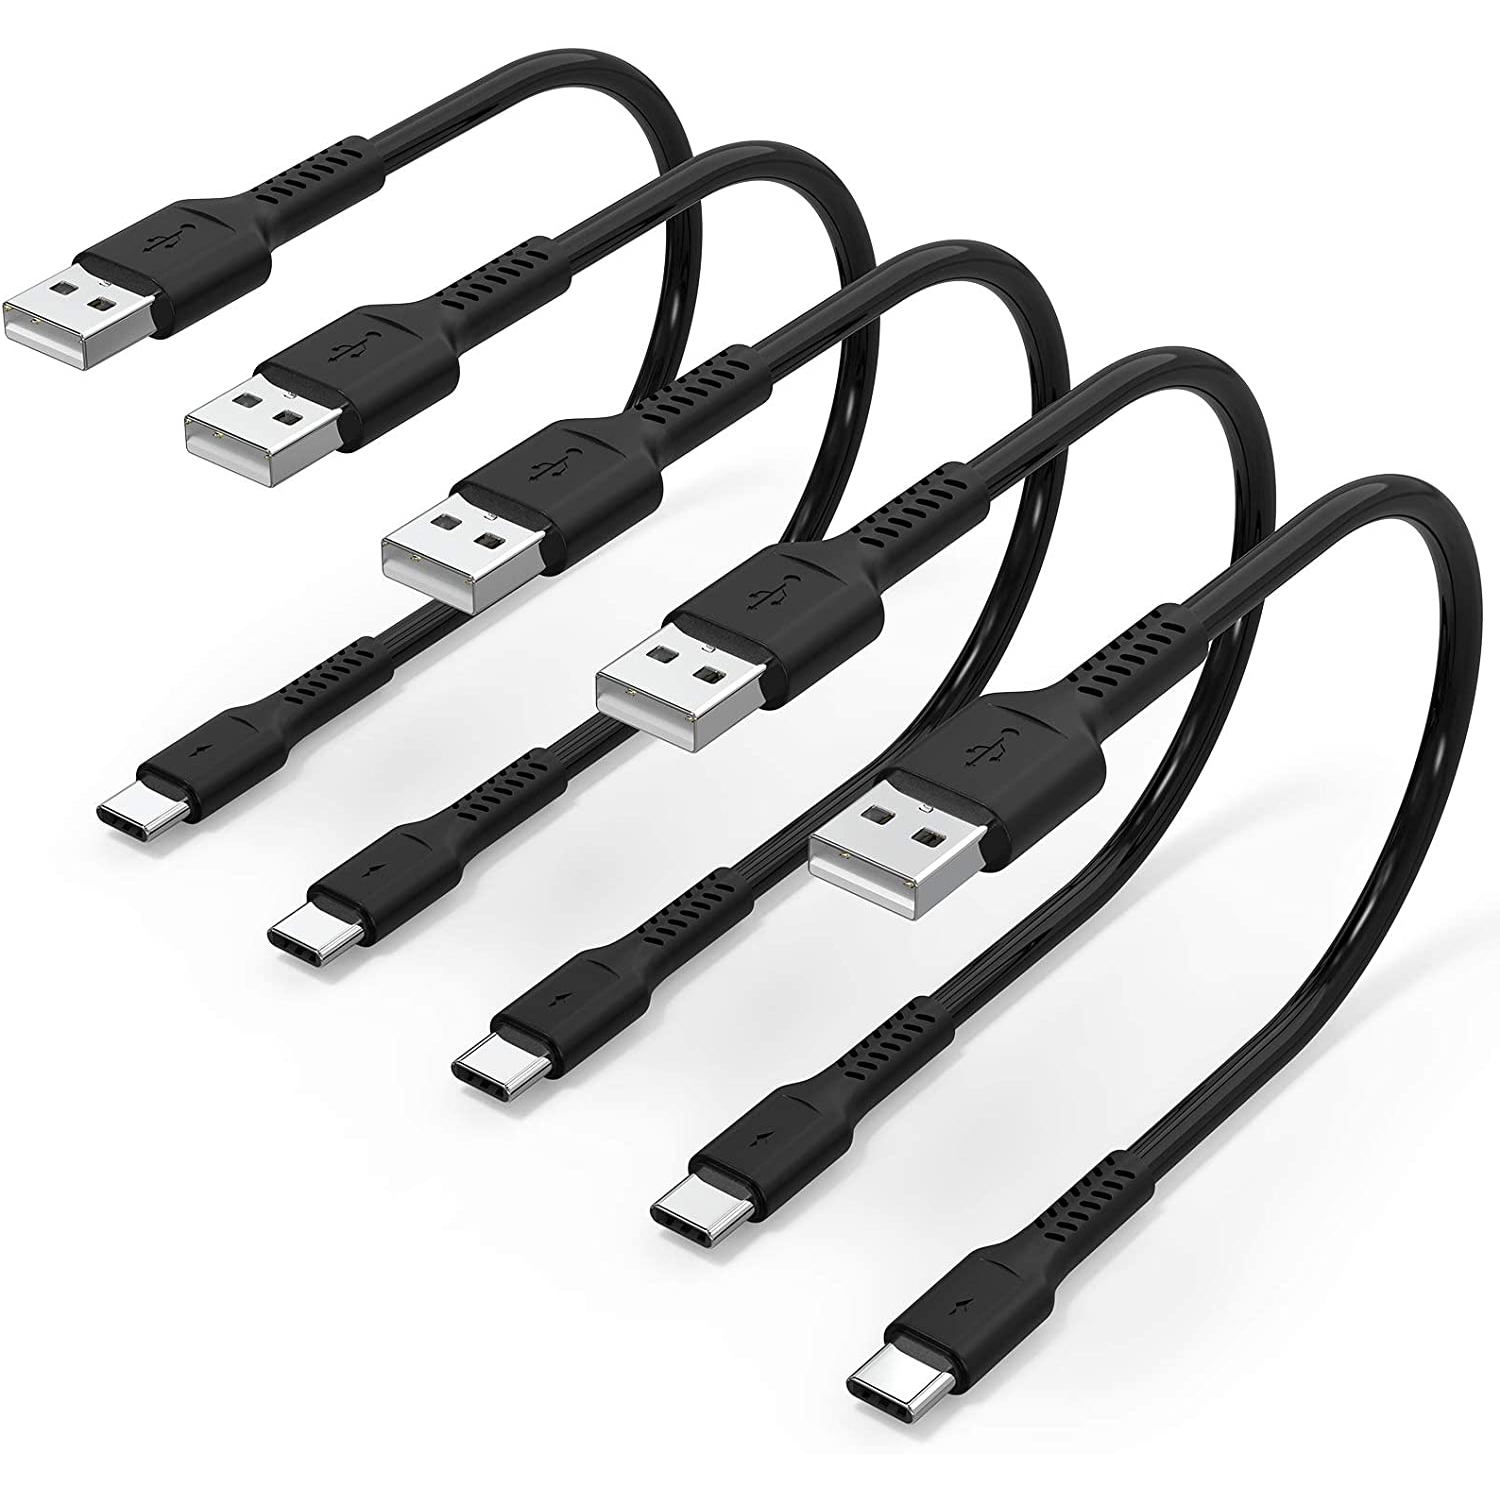 6 Inches USB C Cable Short, 5 Pack USB A to USB Type C Cable Fast Charging Compatible with Samsung Galaxy S22 S10 S9 A53 Note 10 20 Ultra, Moto One G Power, OnePlus 8T LG Stylo 6,